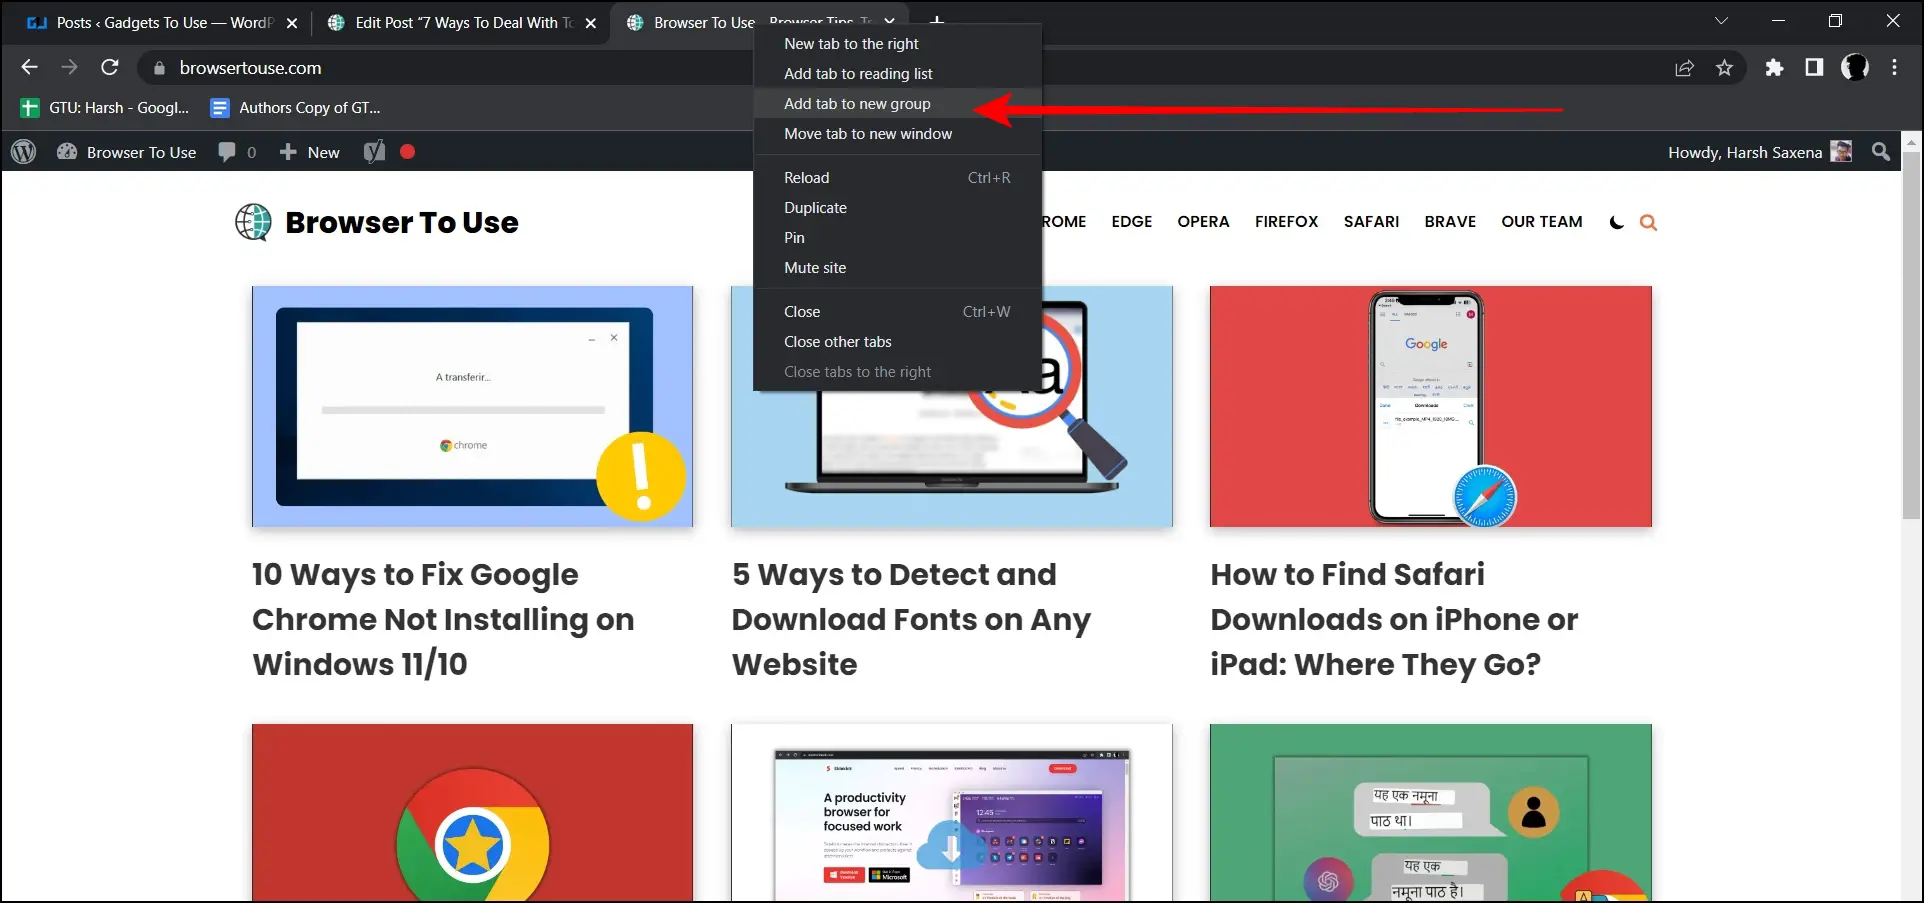 Group Your Tabs To Deal With Too Many Tabs Opened in Chrome